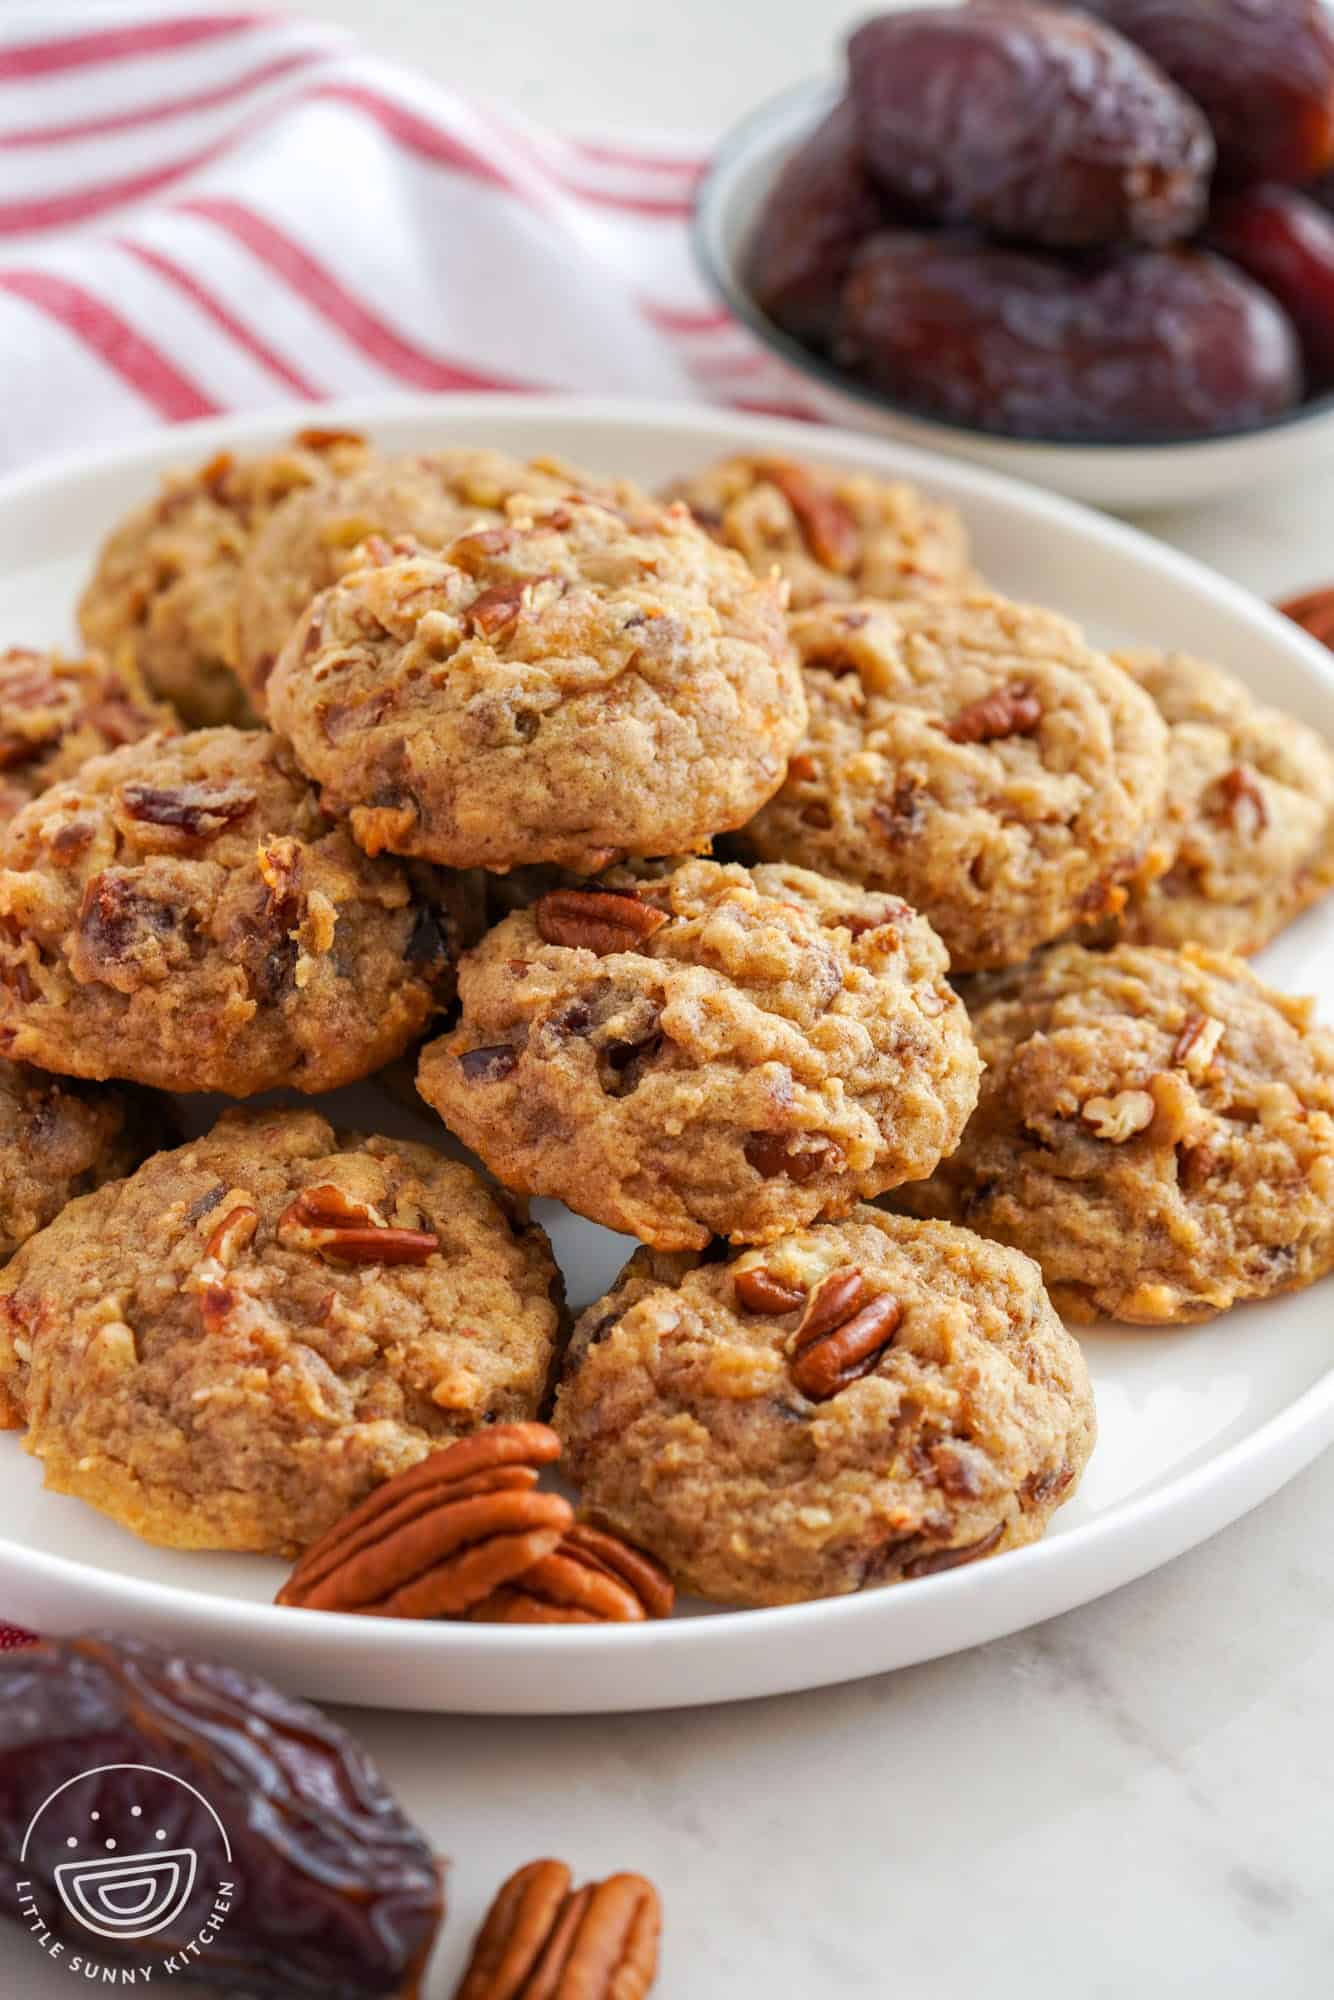 Date cookies with pecans on a white plate. A plate of dates is in the background.